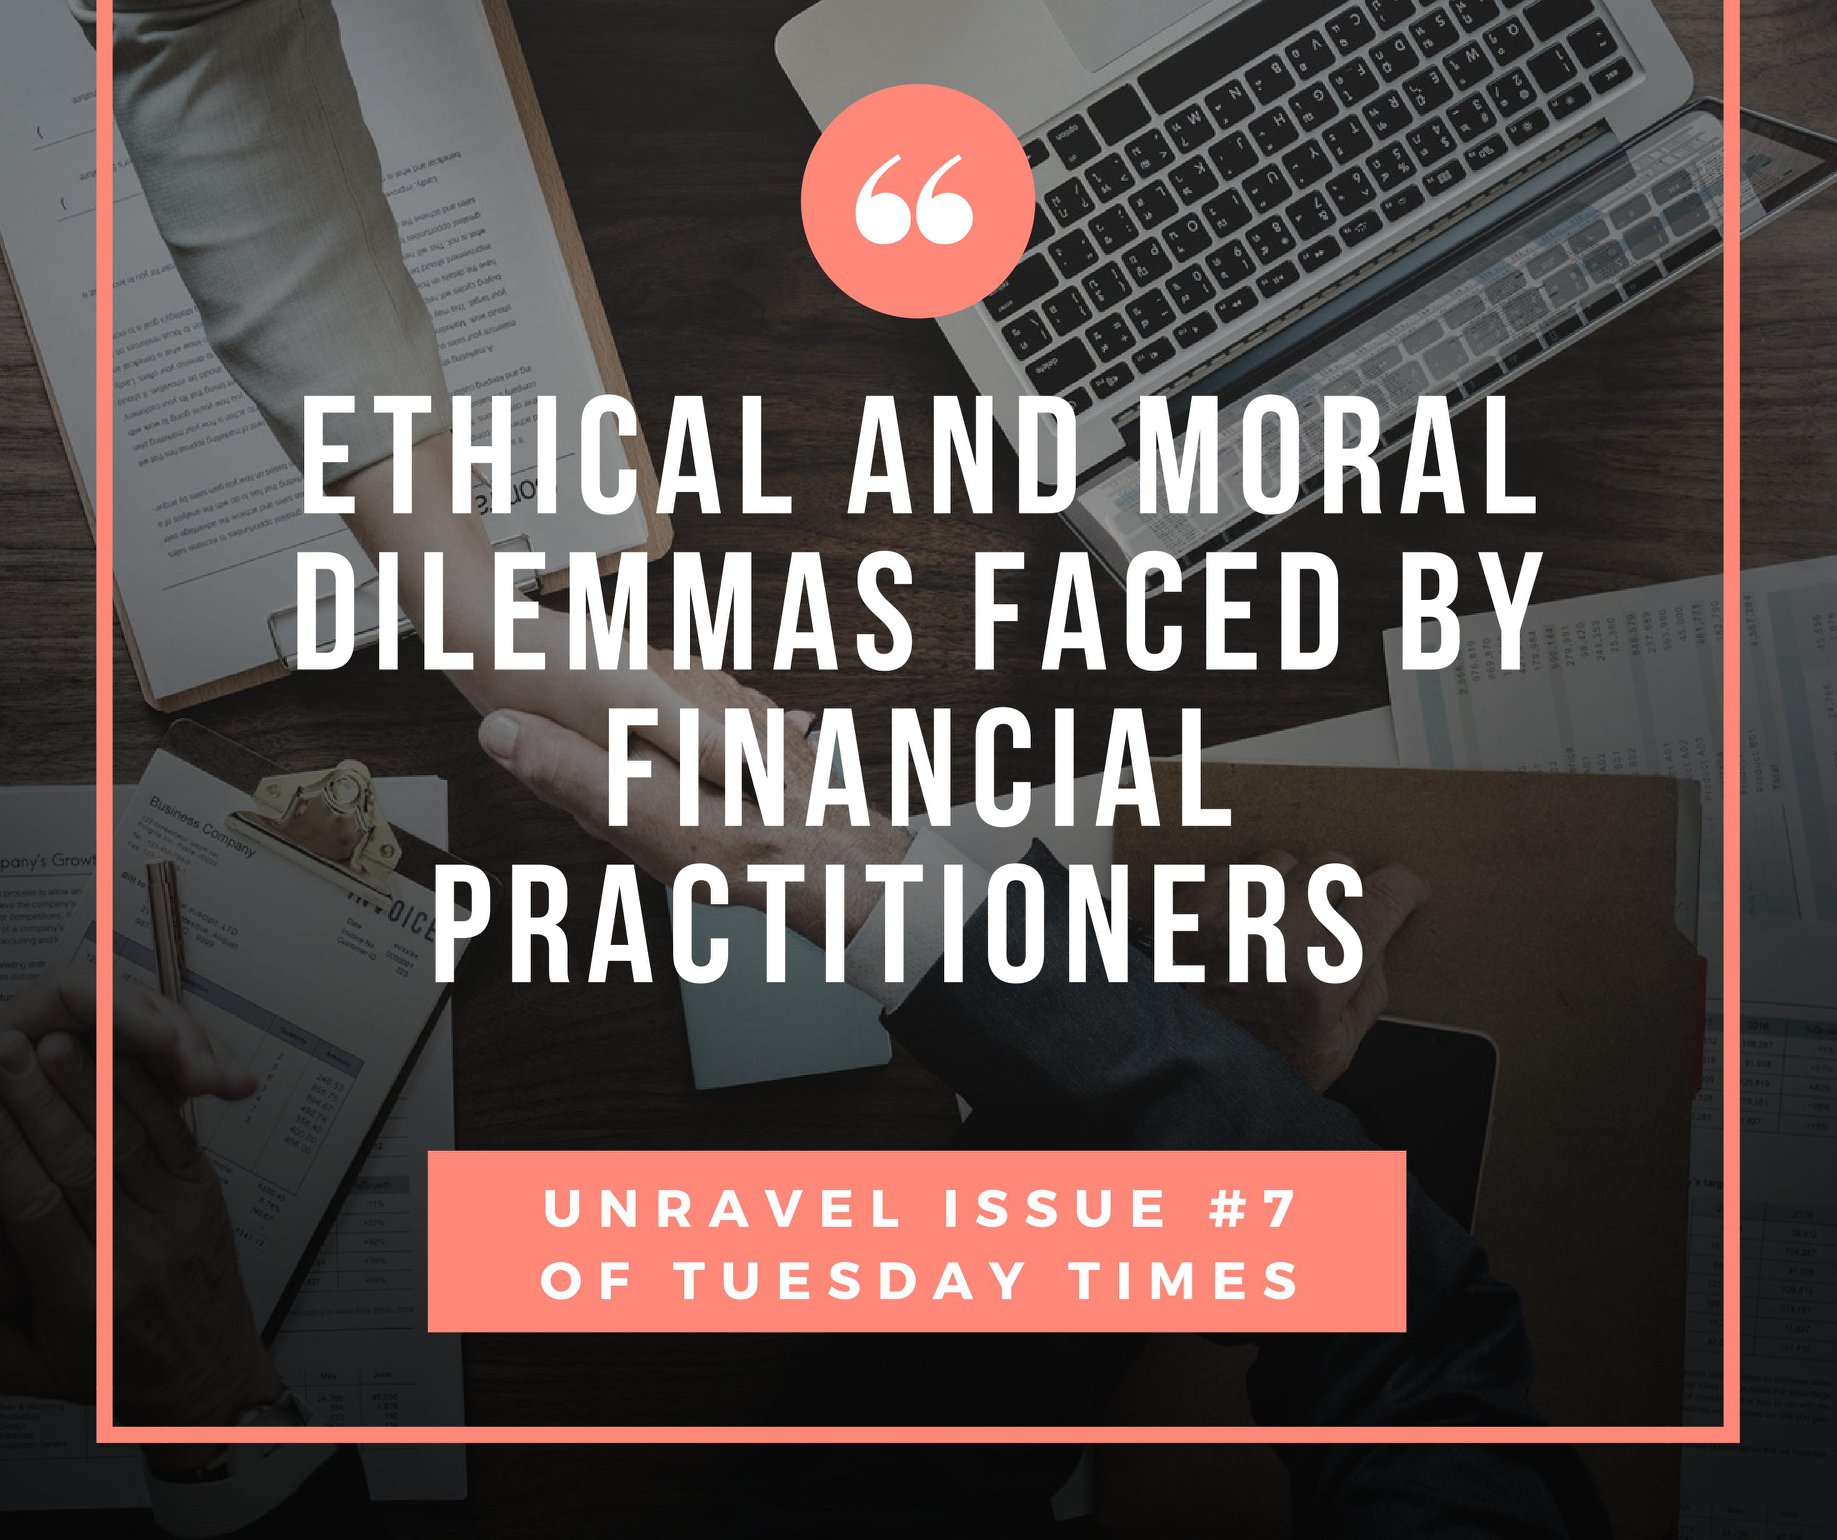 Ethical and Moral Dilemmas Faced By Financial Practitioners